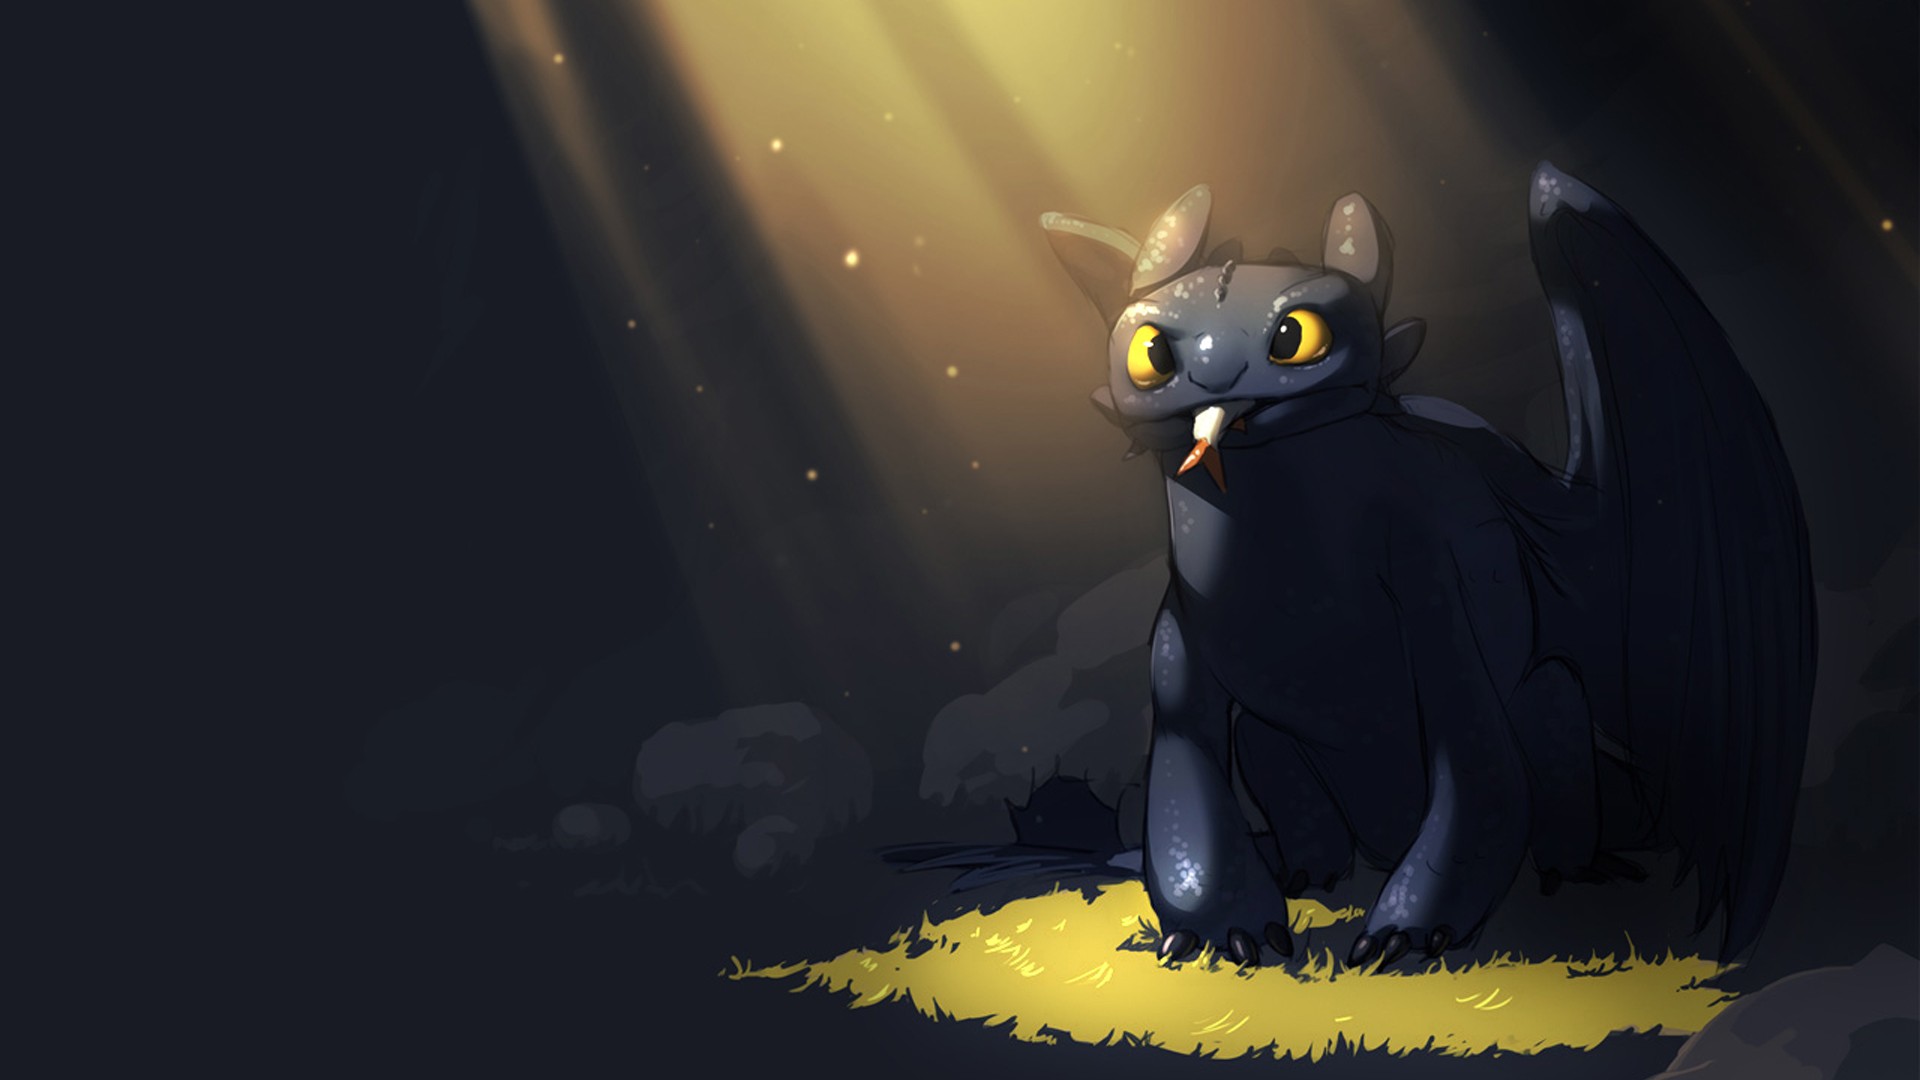 Toothless Night Fury How To Train Your Dragon How To Train Your Dragon 2 Dragon Fish Movies 1920x1080